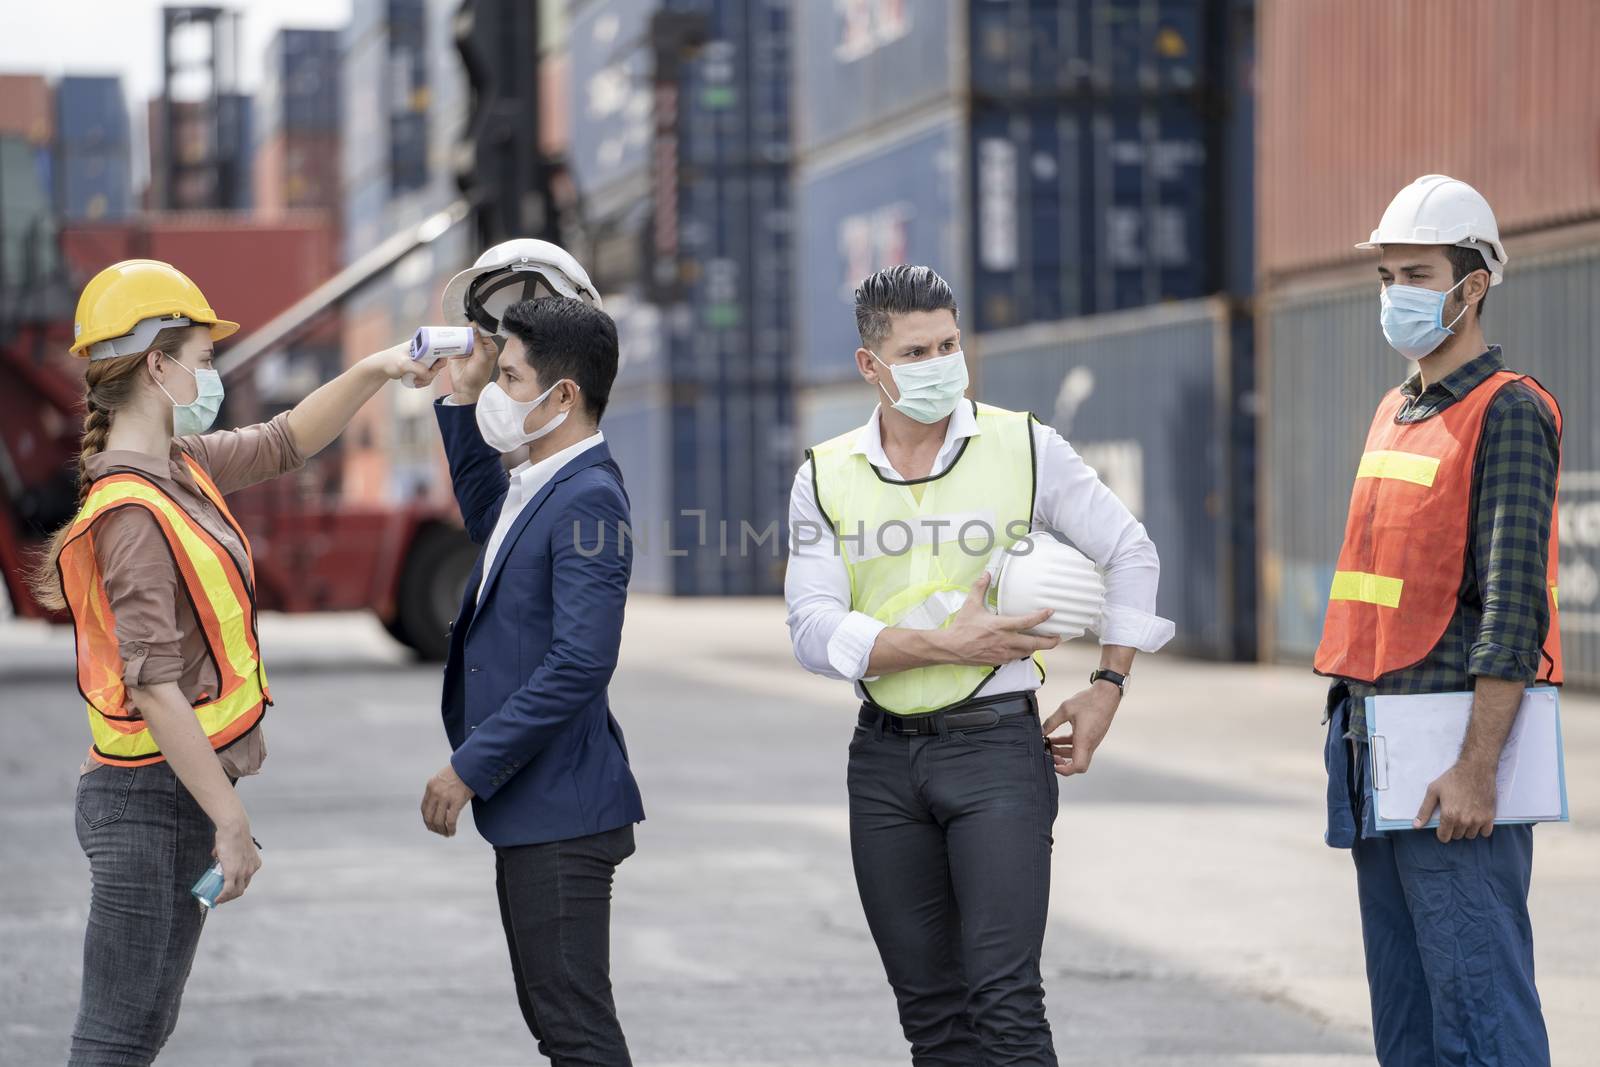 Factory woman worker in a face medical mask and safety dress used measures temperature at worker people standing on queue with a non-contact infrared thermometer.
